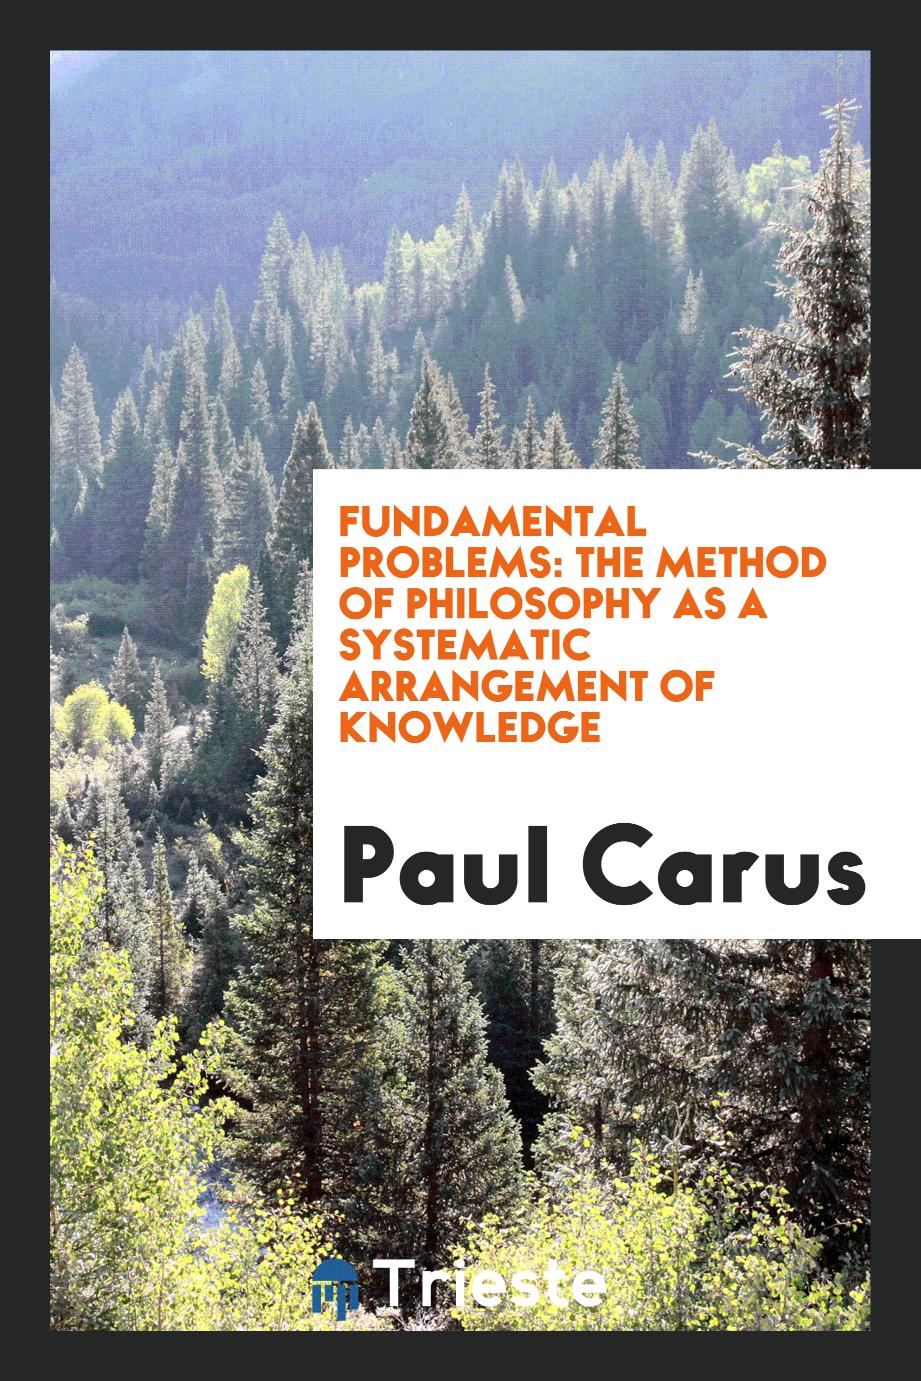 Fundamental problems: the method of philosophy as a systematic arrangement of knowledge